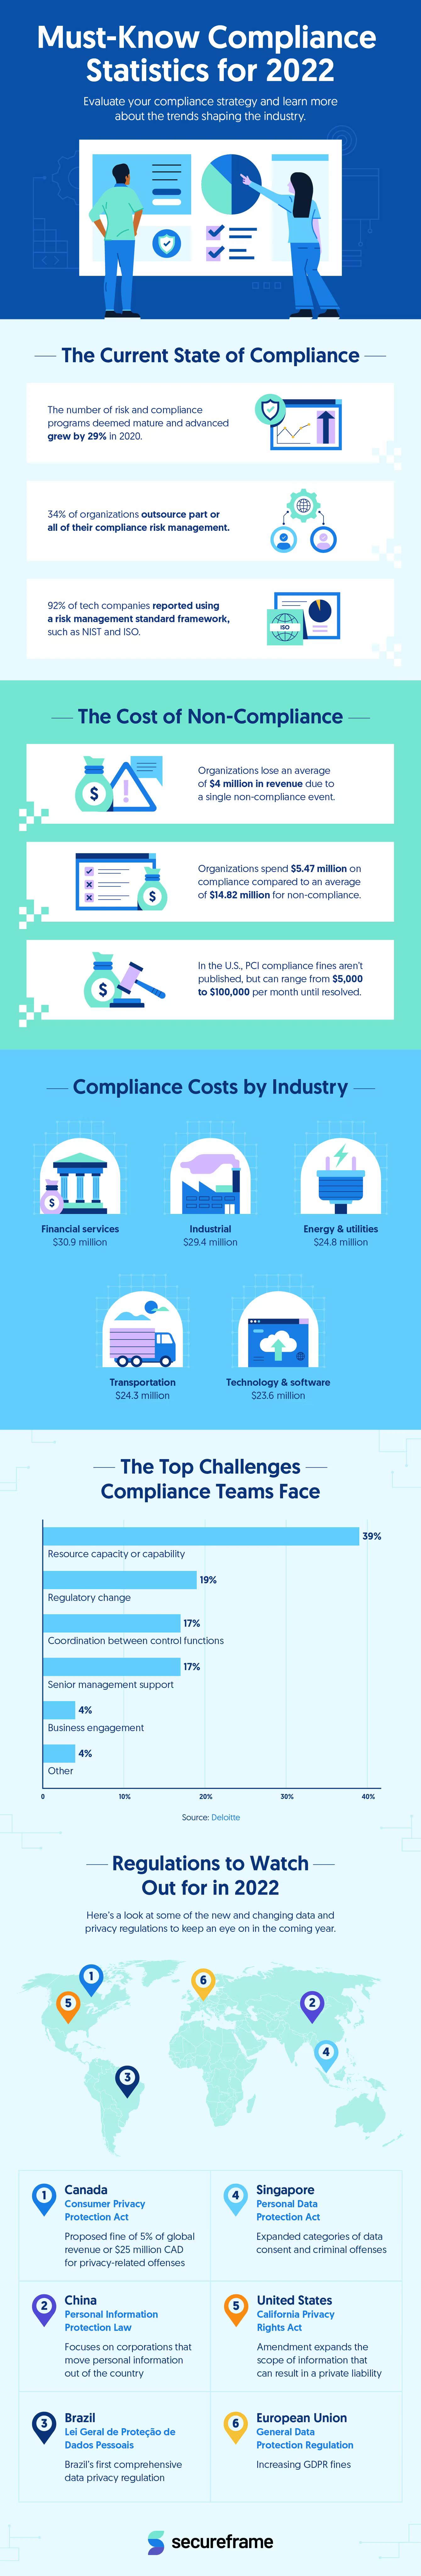 Secure Frame infographic looking at some of the most important compliance statistics ahead of 2022